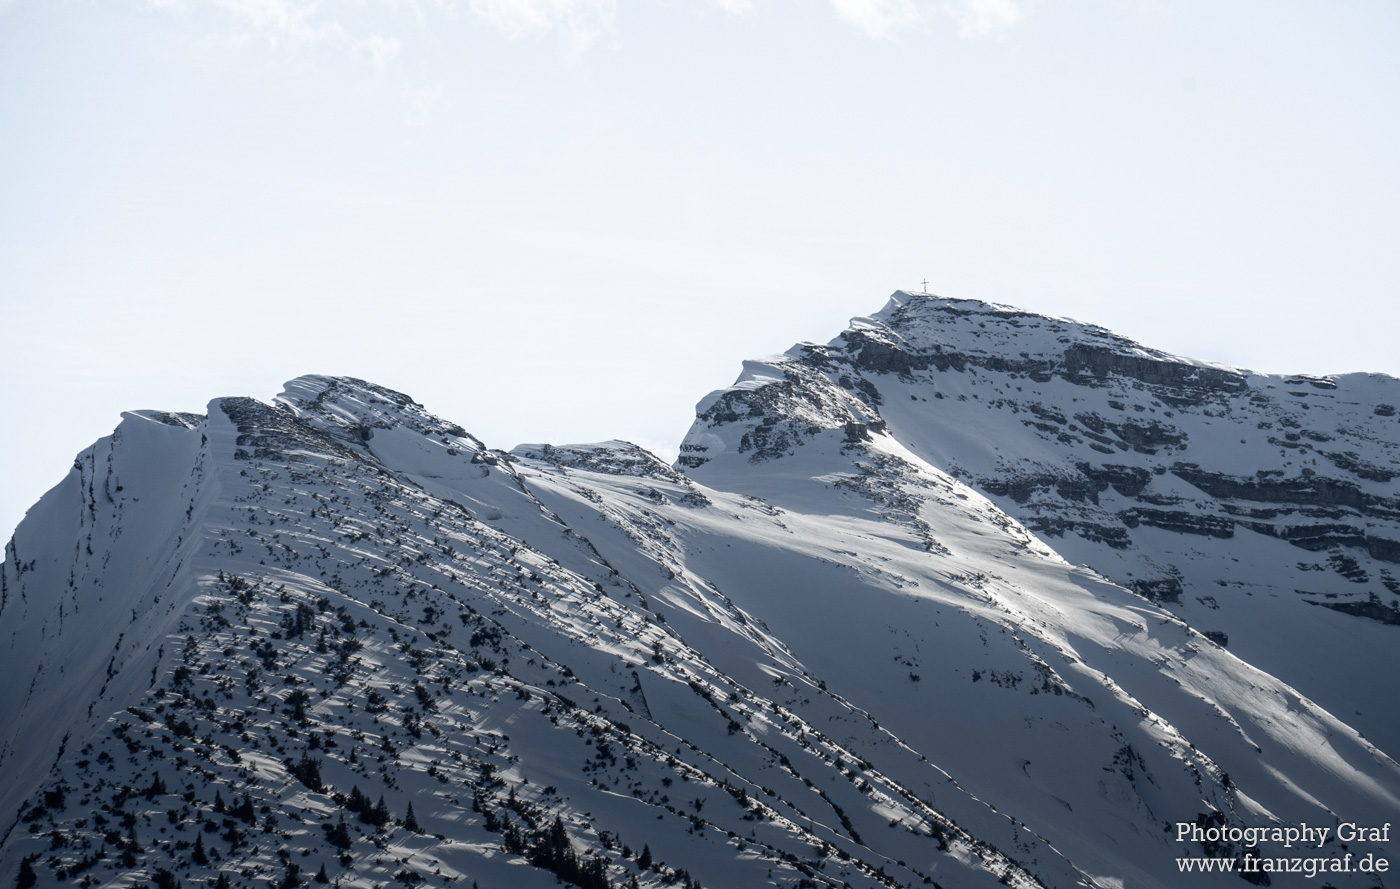 This image captures the raw beauty of nature in its most serene form. It features a majestic snow-covered mountain with a clear, radiant blue sky as the backdrop. The mountain's summit, slopes, and ridges are beautifully blanketed with a pristine layer of snow, making the glacial landform even more impressive. The terrain is also dotted with trees, adding a touch of life to the icy, white landscape. In the distance, one can see the outline of a mountain range, possibly the Alps, further enhancing the overall vista. This winter landscape is breathtaking, a perfect illustration of a peaceful, snowy day in the mountains.